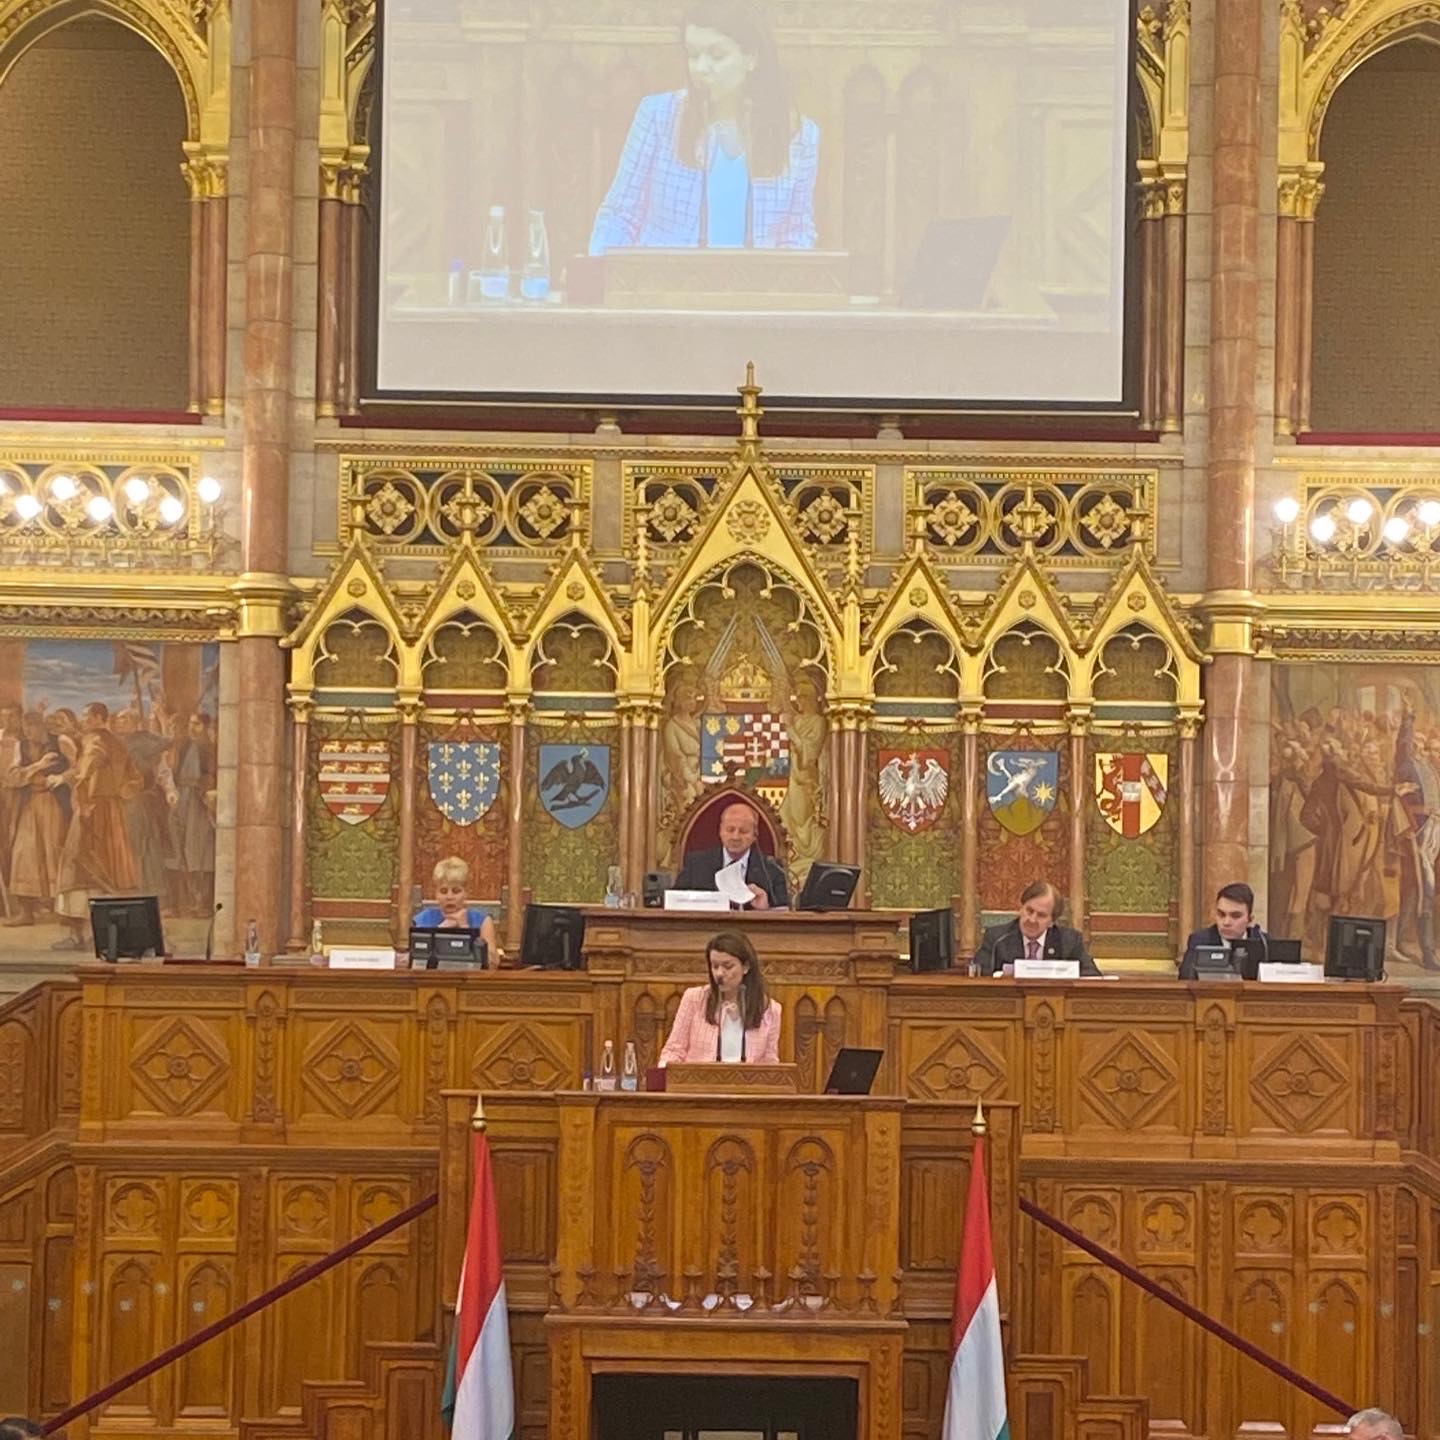 Speaking at the Hungarian Parliament about the intersection between human trafficking and terrorism